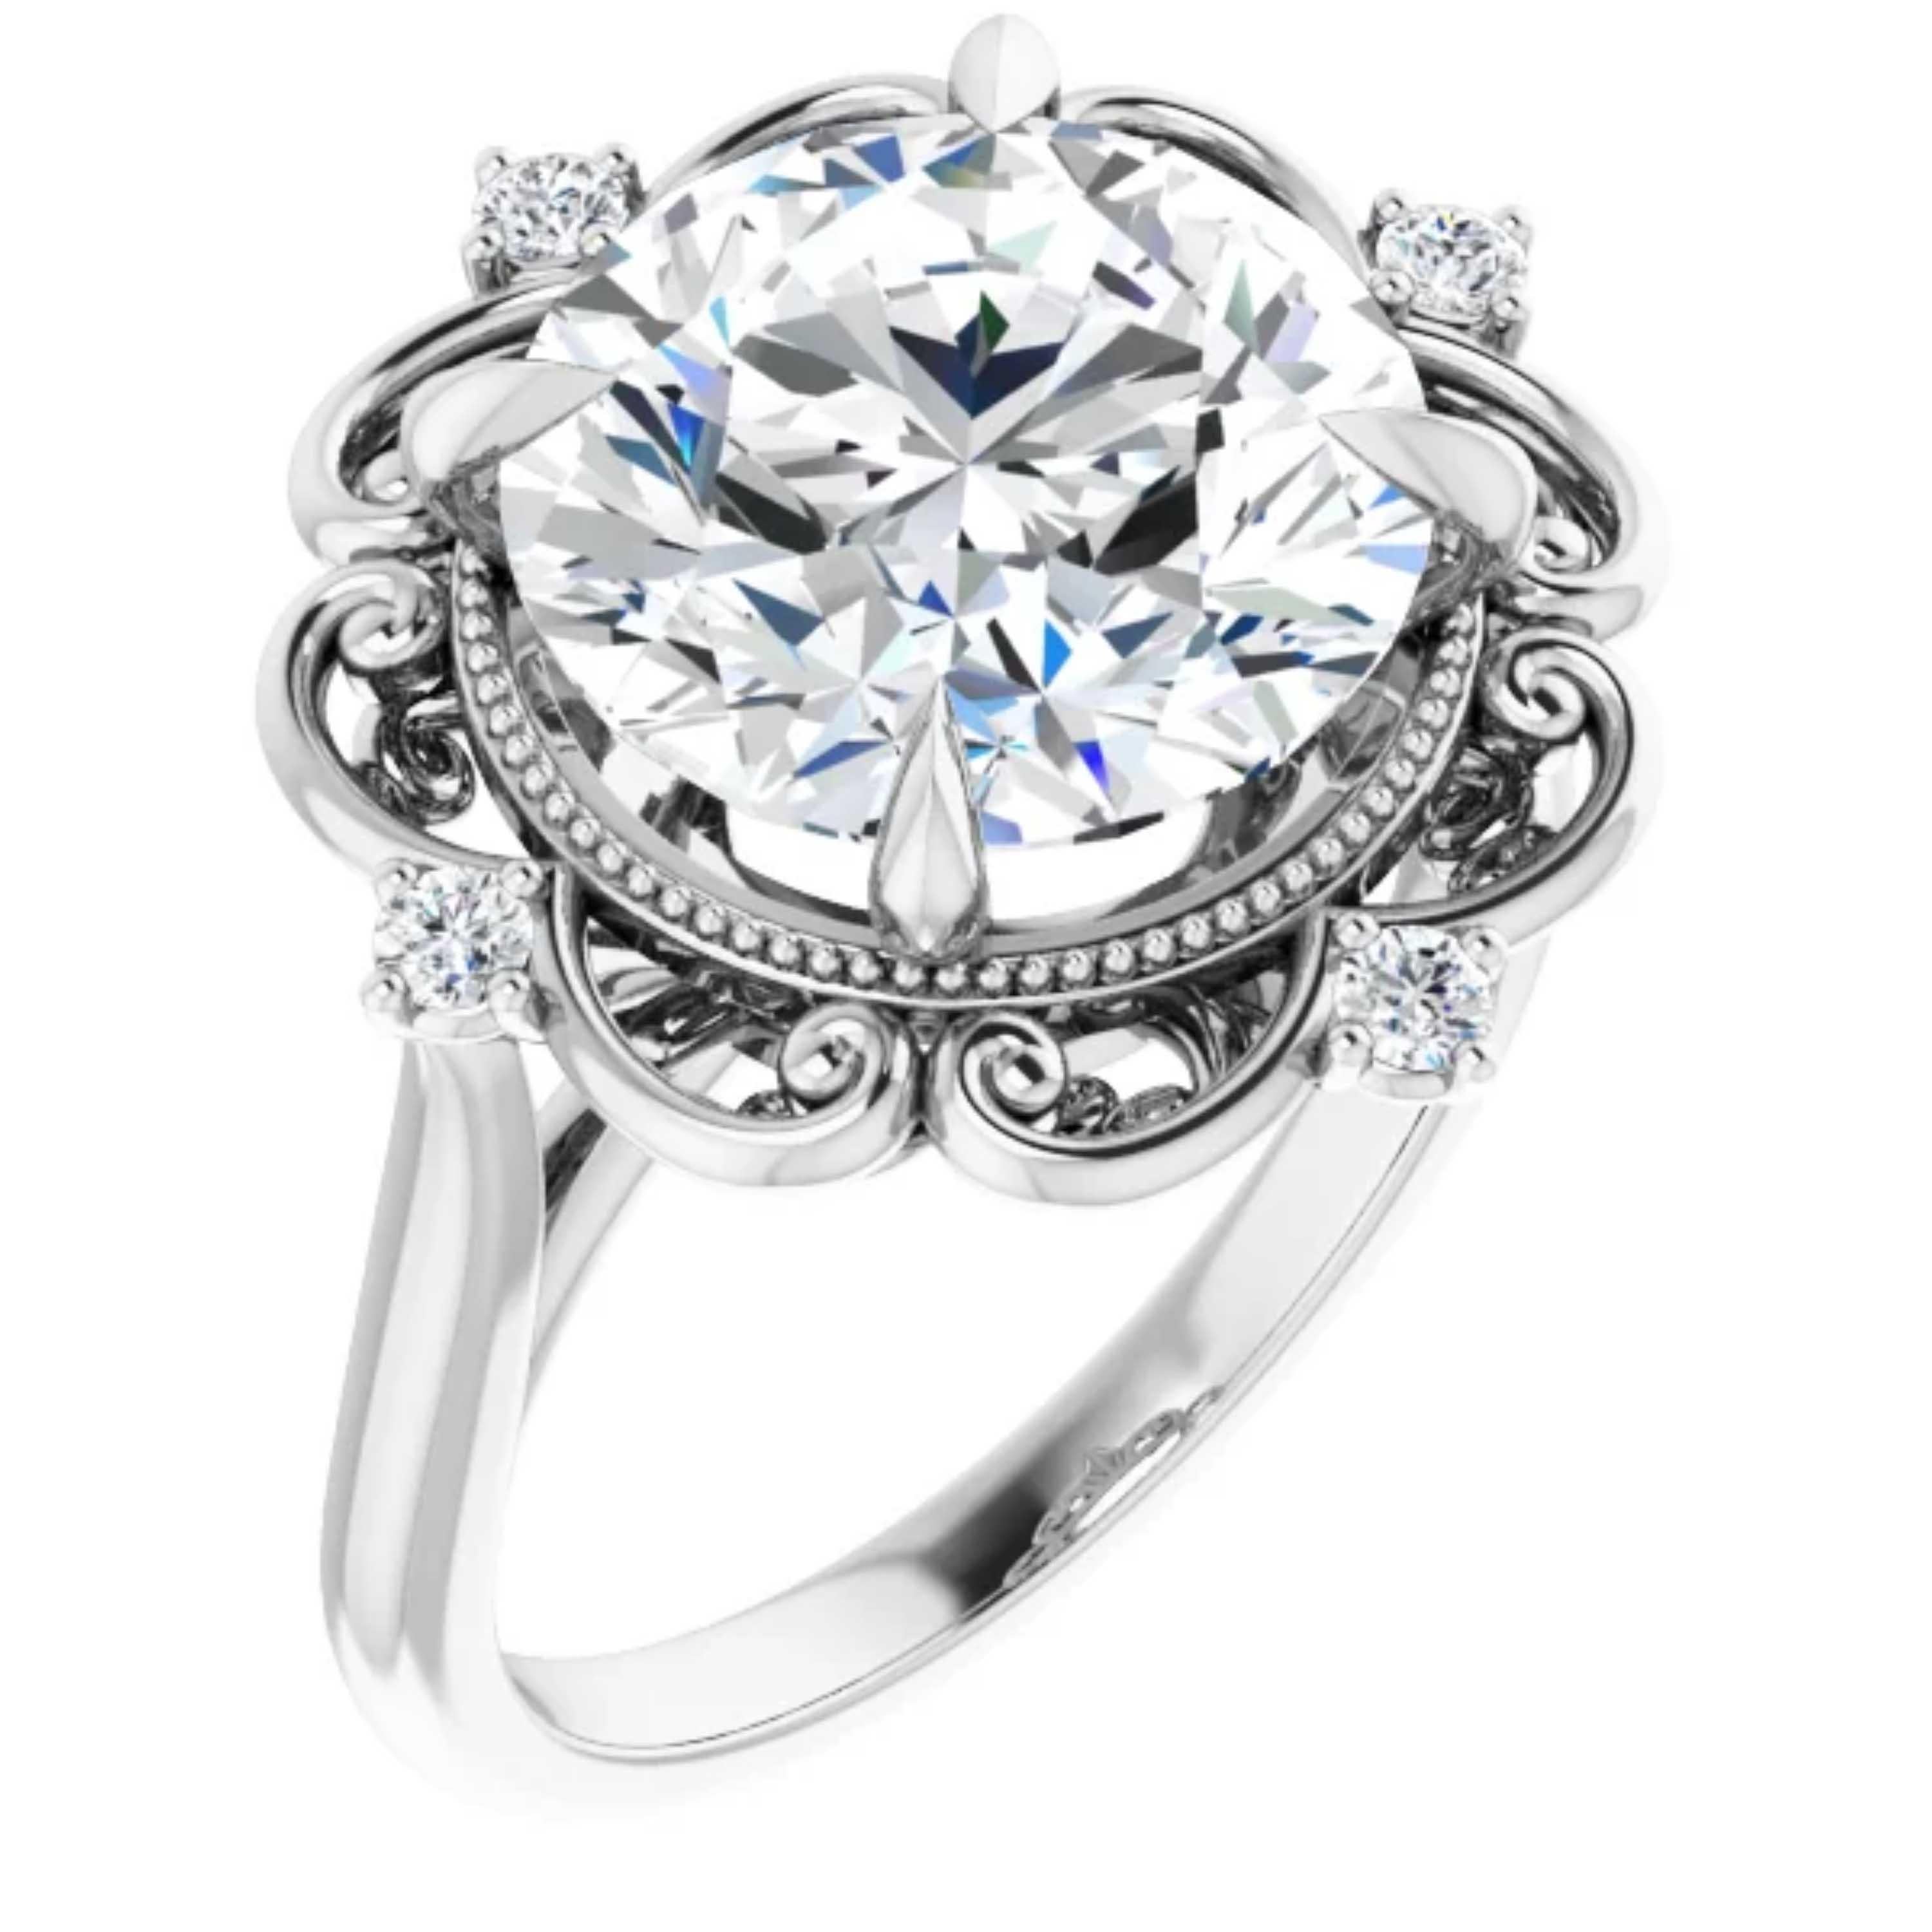 Inspired by the Victorian era, this vintage style engagement ring is decorated with intricate milgrain beads. Beautiful filigrees adorn the gallery and the center diamond. Featuring a GIA certified natural round brilliant diamond in the center, this